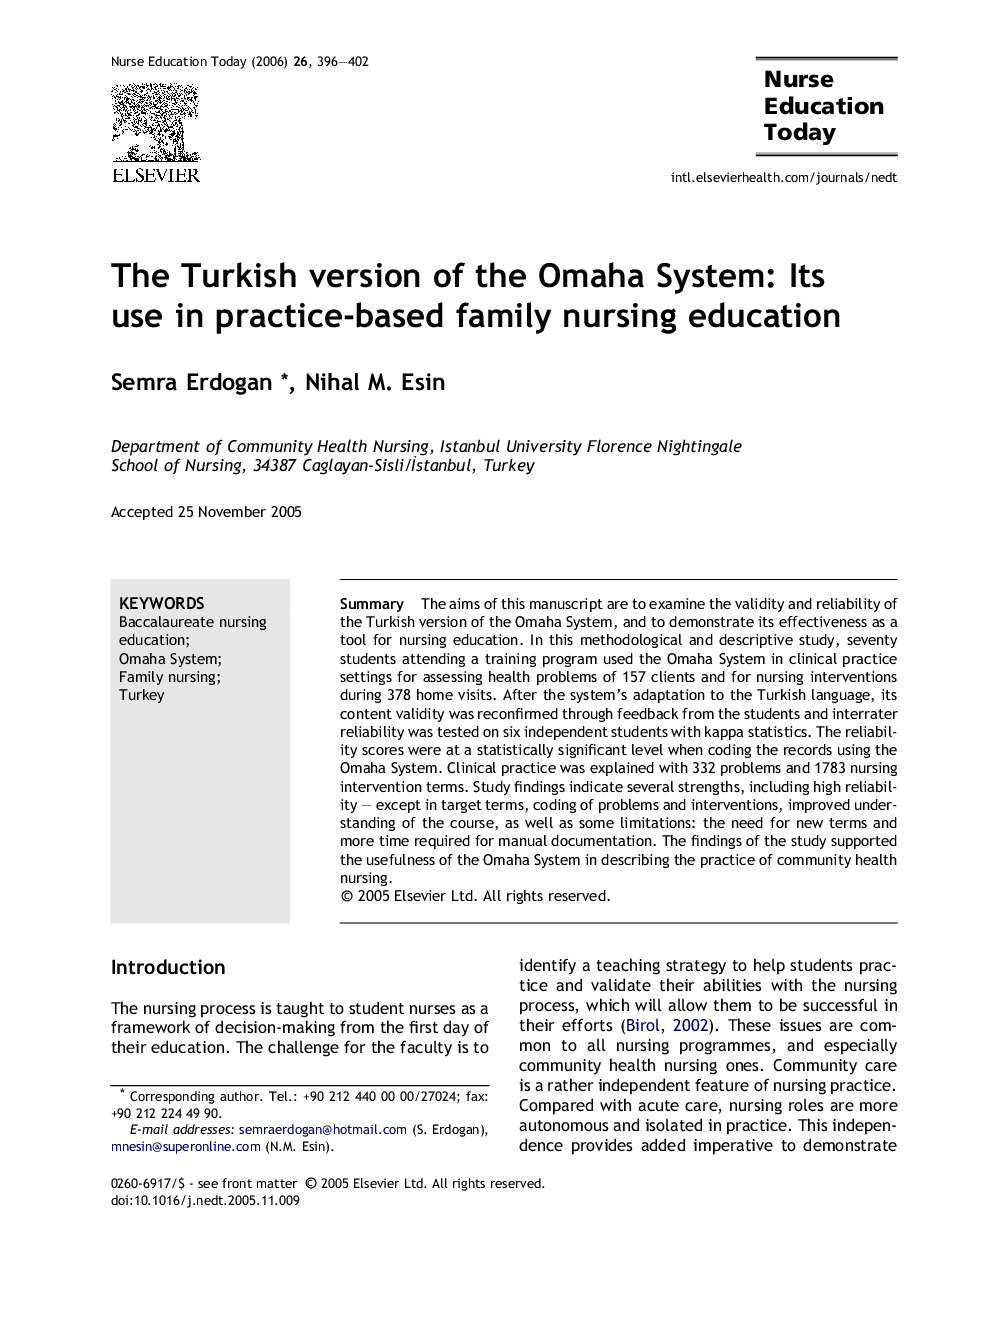 The Turkish version of the Omaha System: Its use in practice-based family nursing education